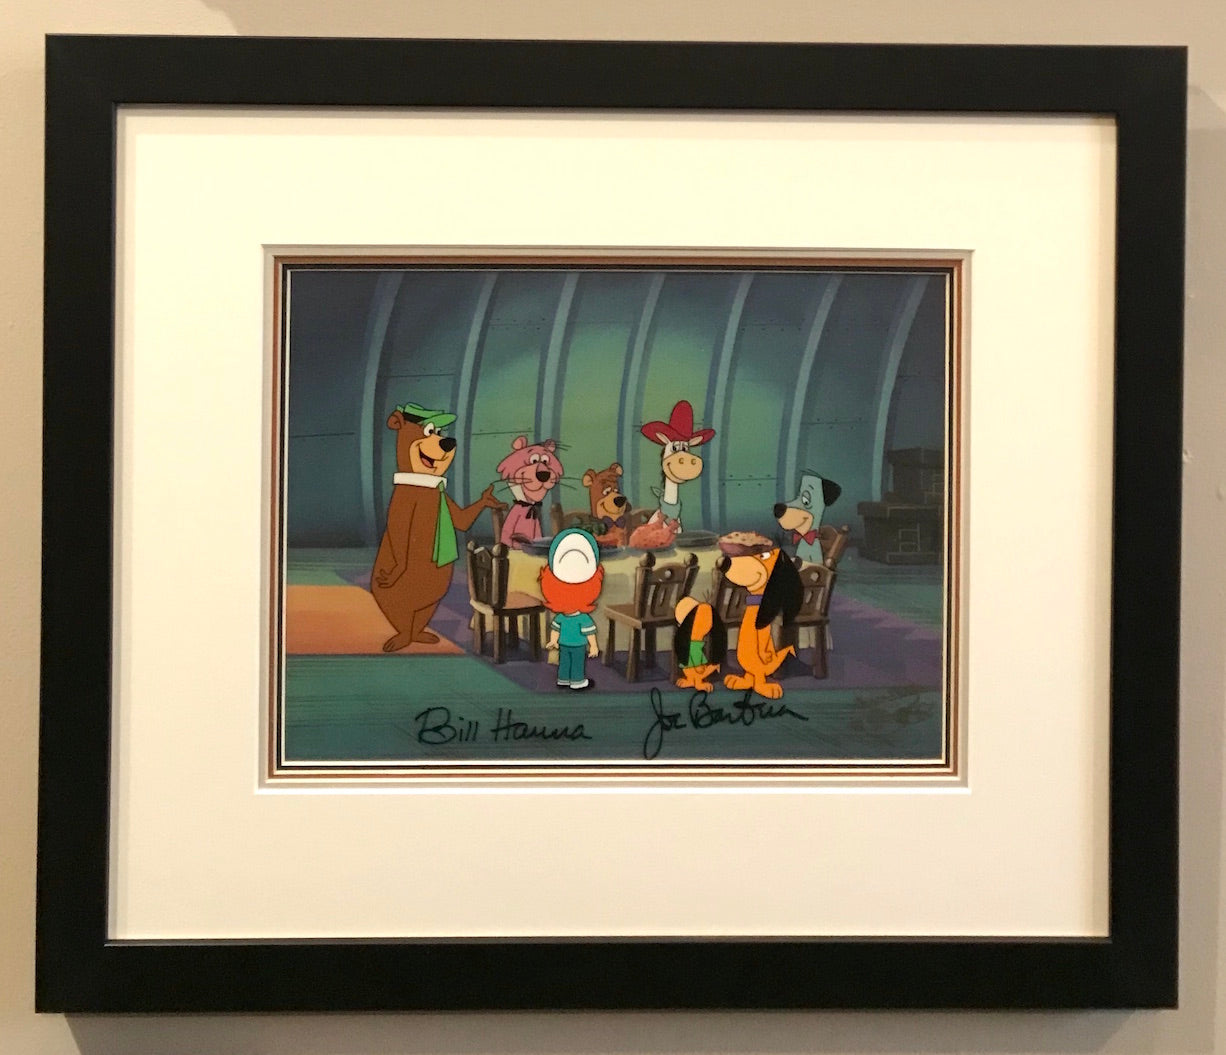 Original Signed Hanna Barbera Production Cel from Yogi and the Magical Flight of the Spruce Goose (1987)